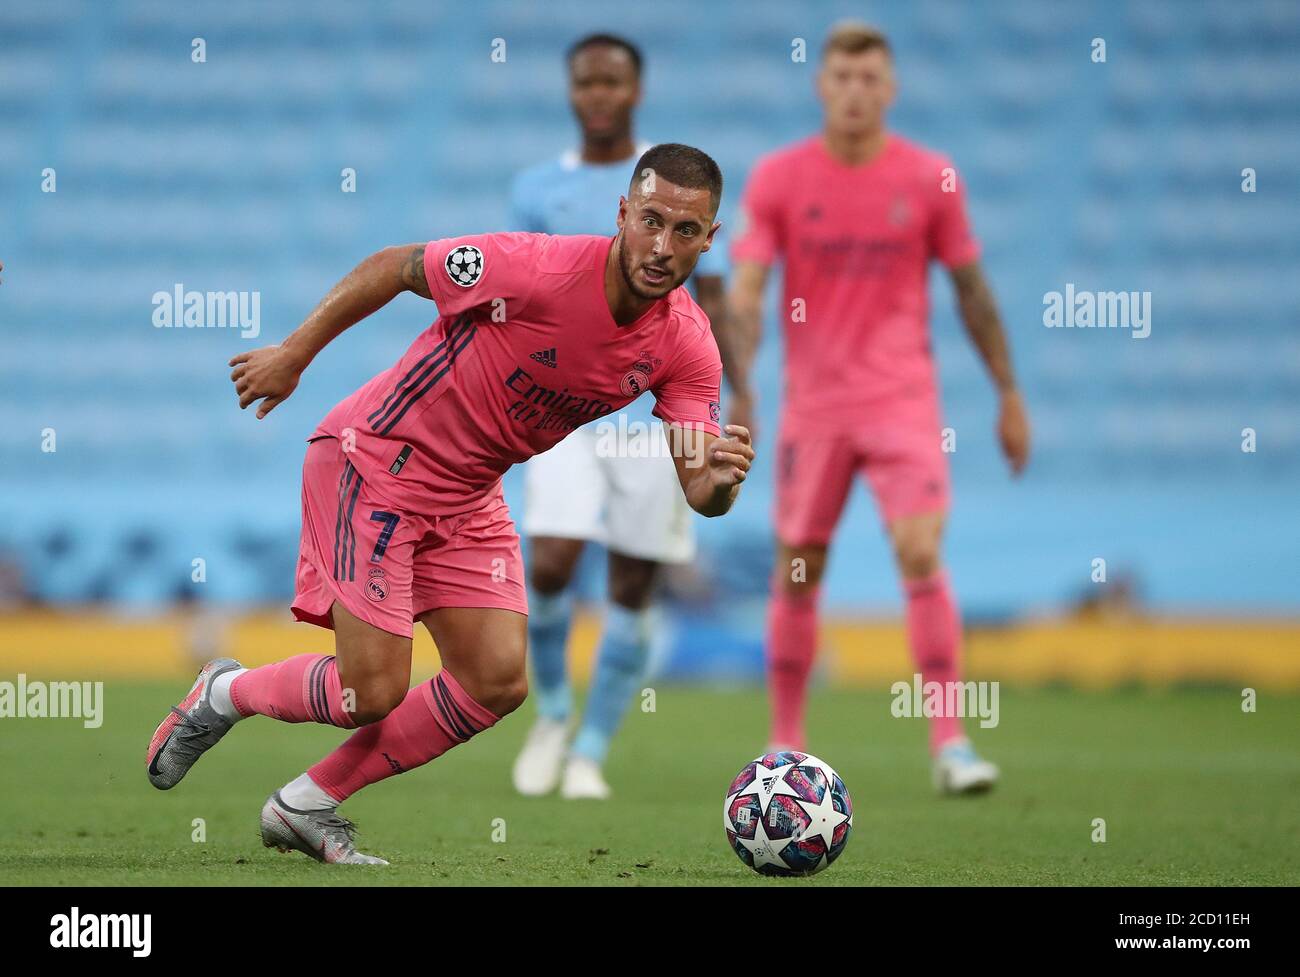 Real Madrid's Eden Hazard during the UEFA Champions League, round of 16, second leg match at the Etihad Stadium, Manchester. Friday August 7, 2020. See PA story SOCCER Man City. Photo credit should read: Nick Potts/PA Wire. Stock Photo